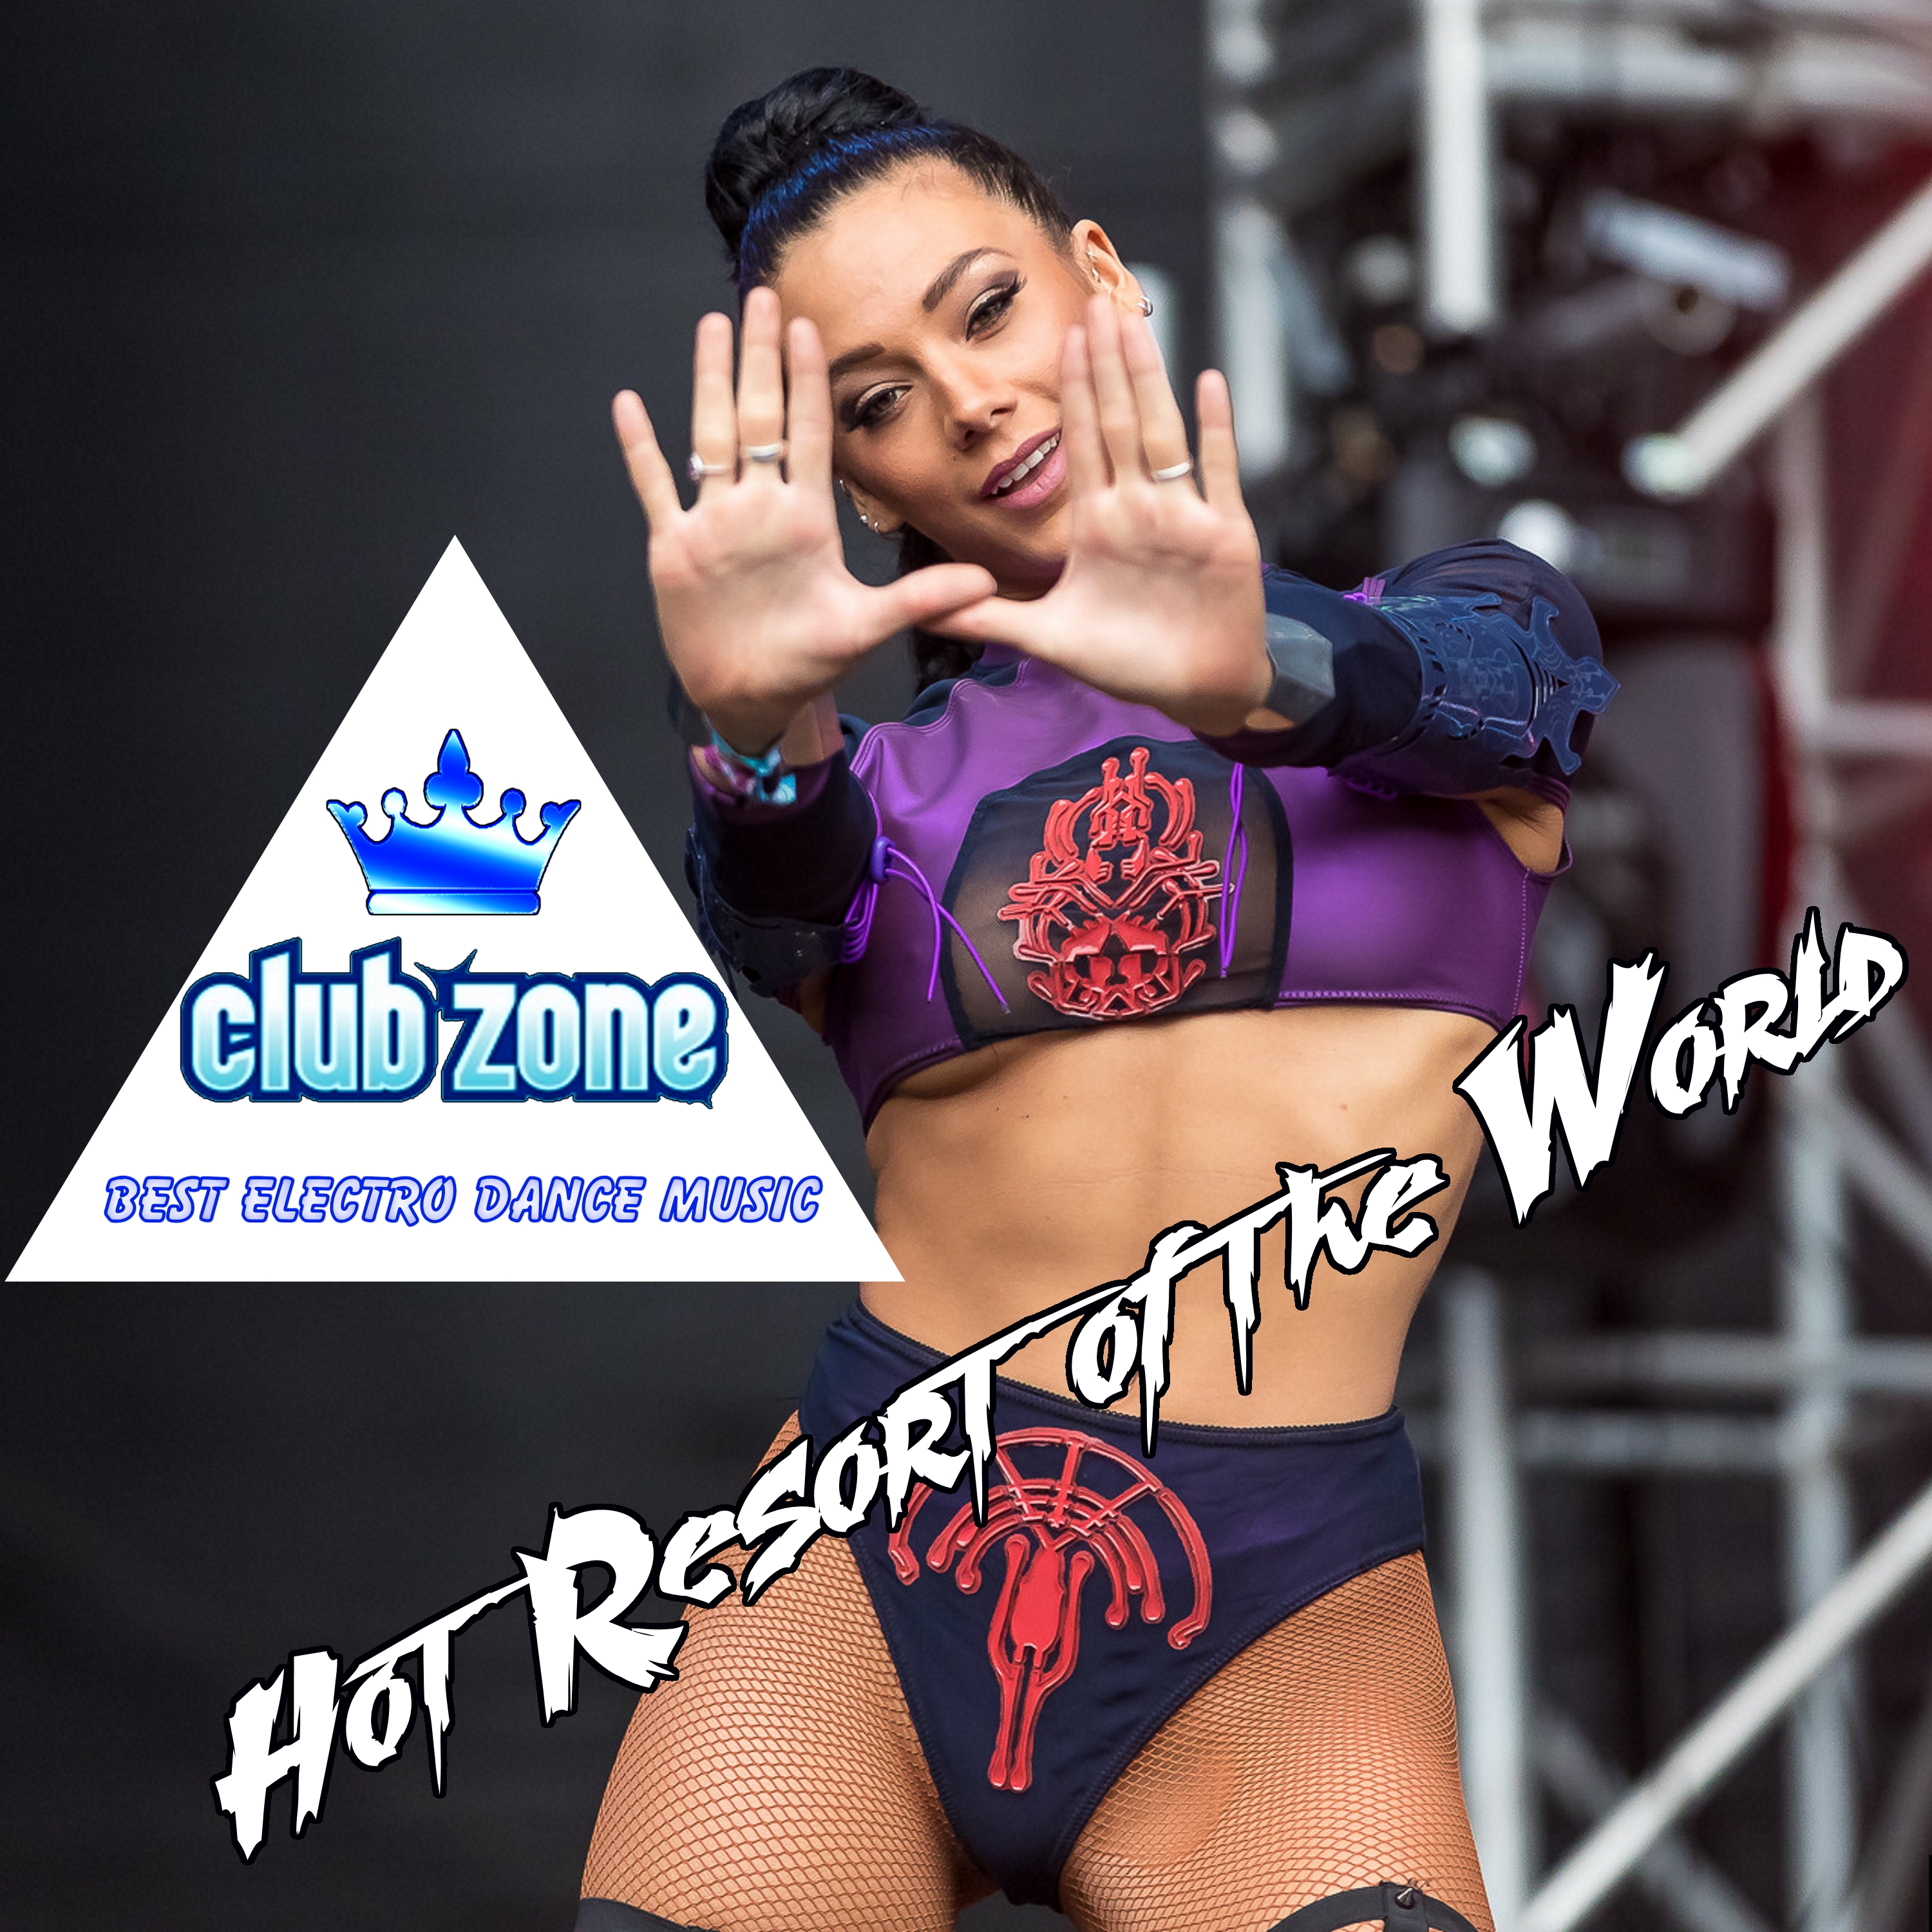 Hot Resort of the World (Compiled & Mixed by Club Zone)